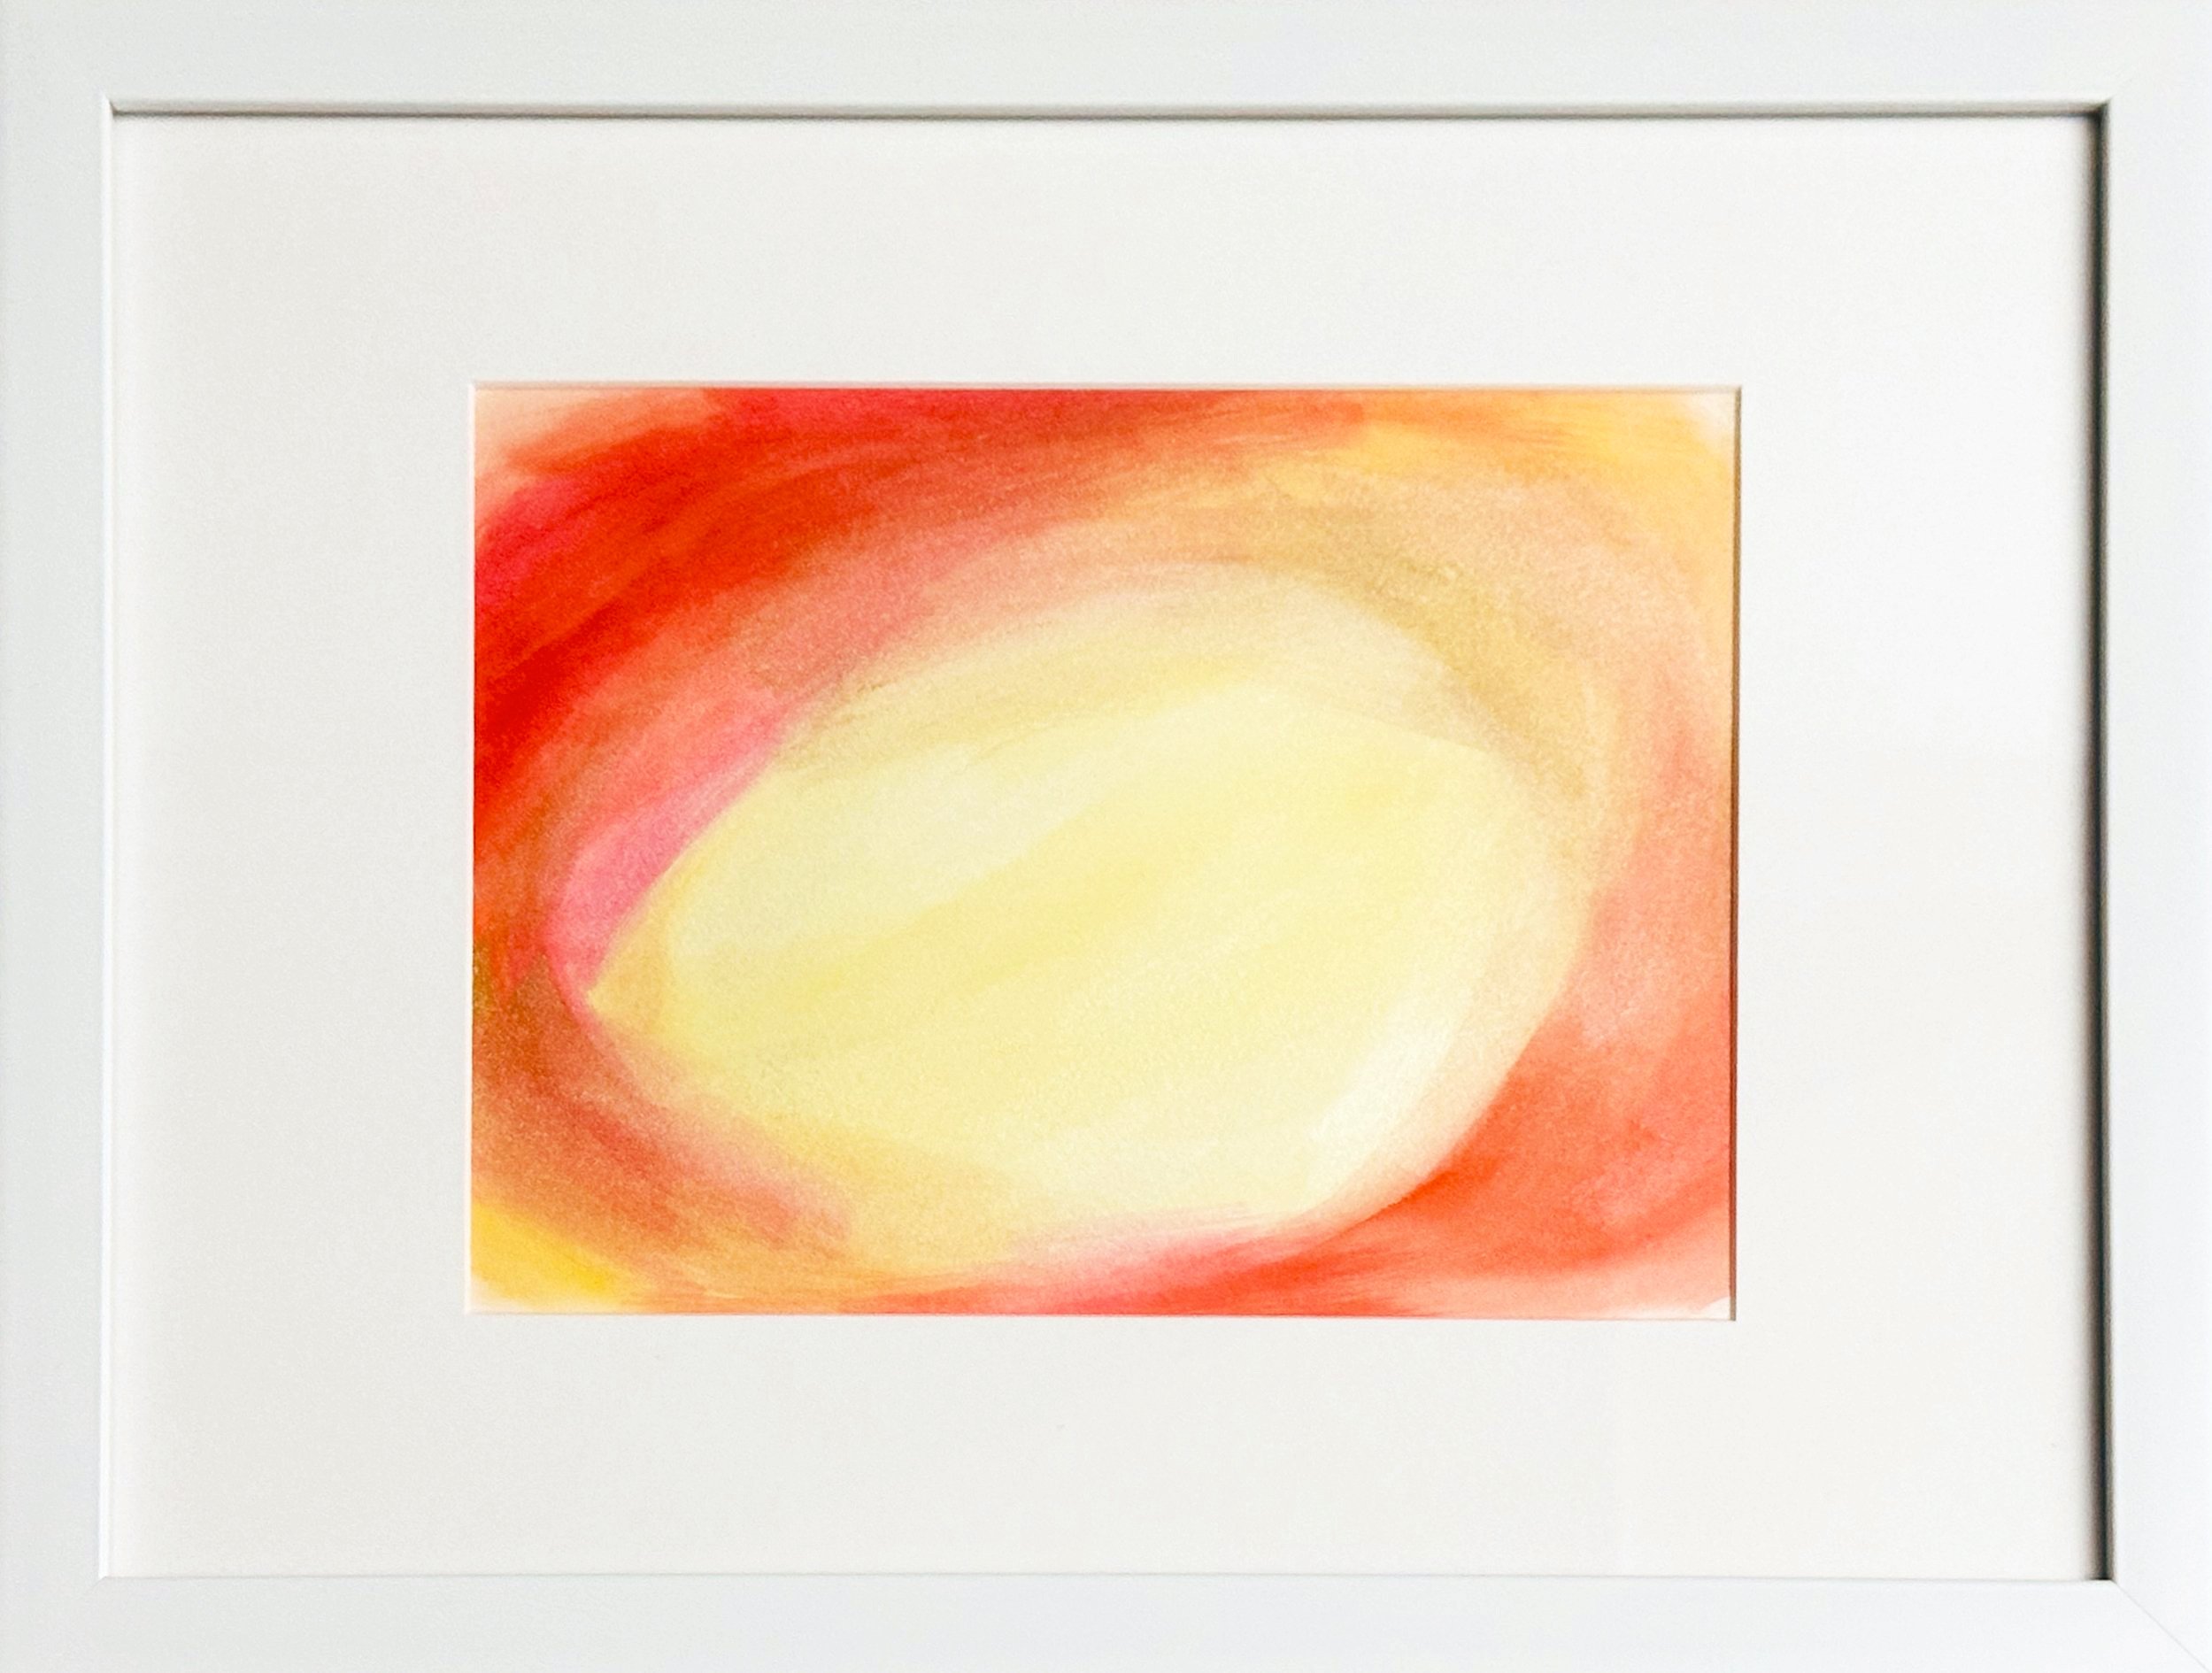  Blink, solar dawn * 2020 -2023 Watercolor, gouache, pigment, metallic ink on watercolor paper, 7 x 10 inches (Framed: 12 x 15 inches),  Private collection, New York  